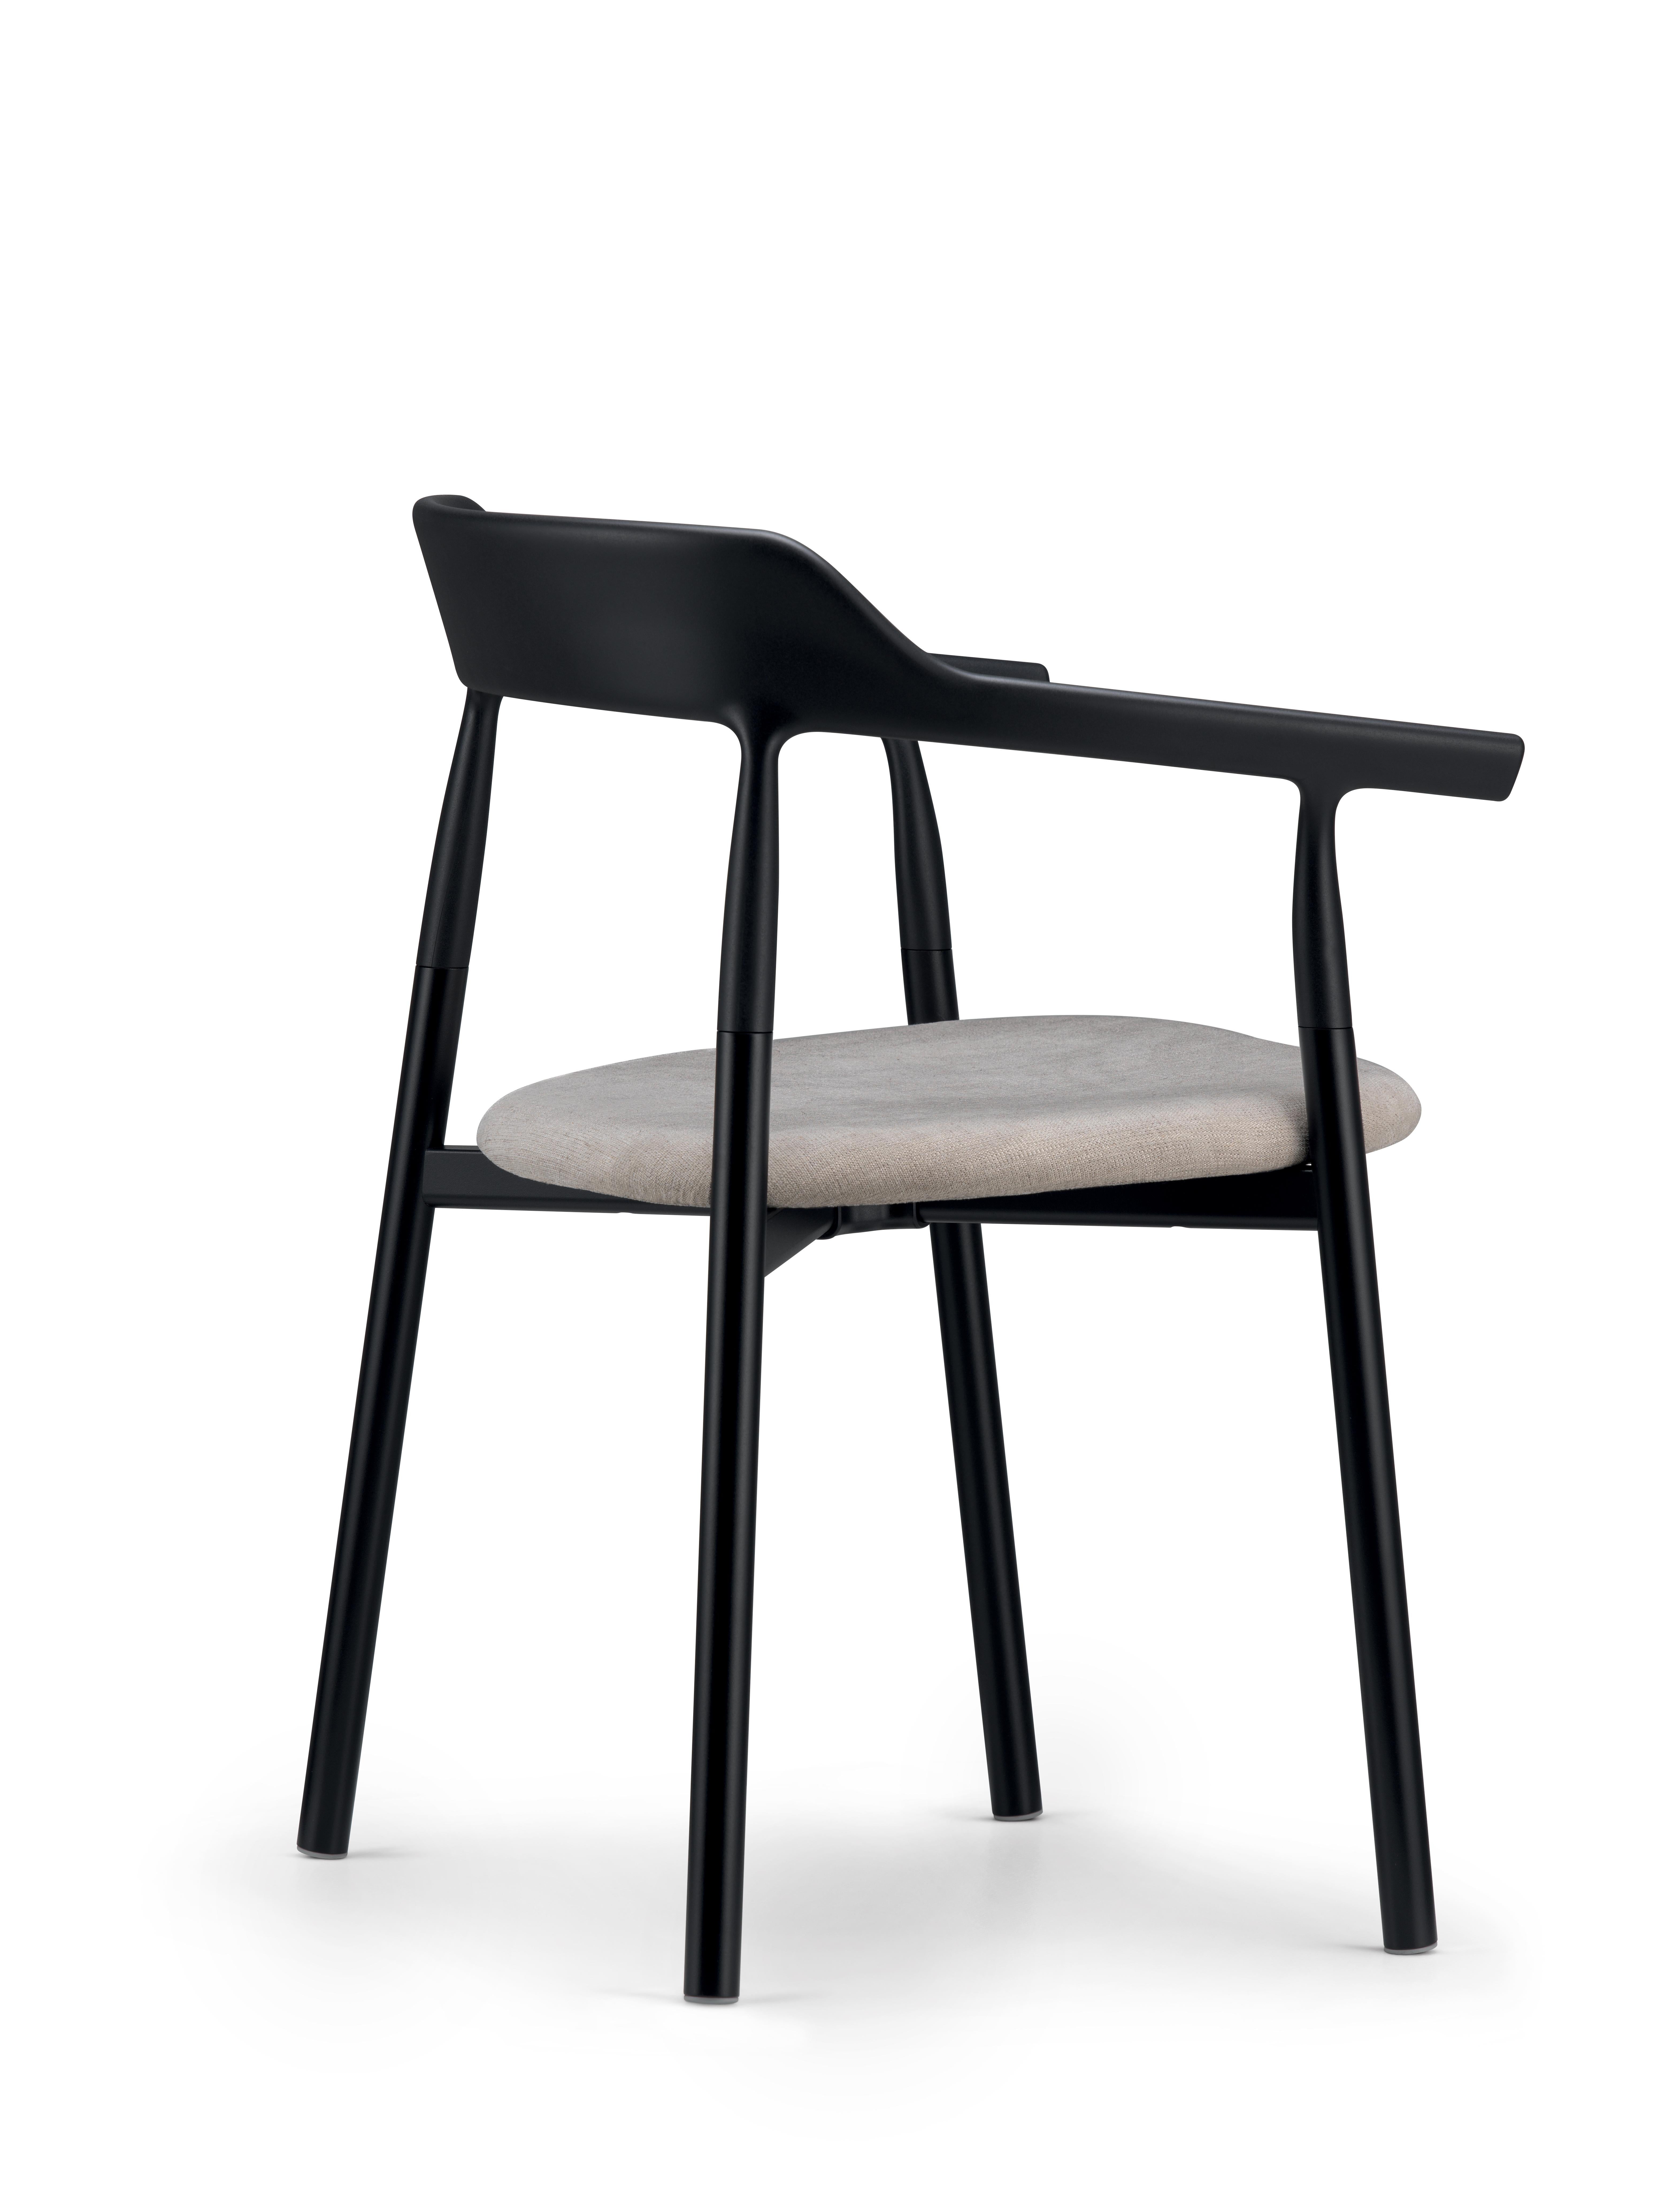 Alias 10E Twig Comfort Chair in White Upholstery and Black Lacquered Steel Frame by Nendo

Chair with structure in lacquered steel; back in solid lacquered plastic material; seat in solid plastic material lacquered or upholstered with fabric or